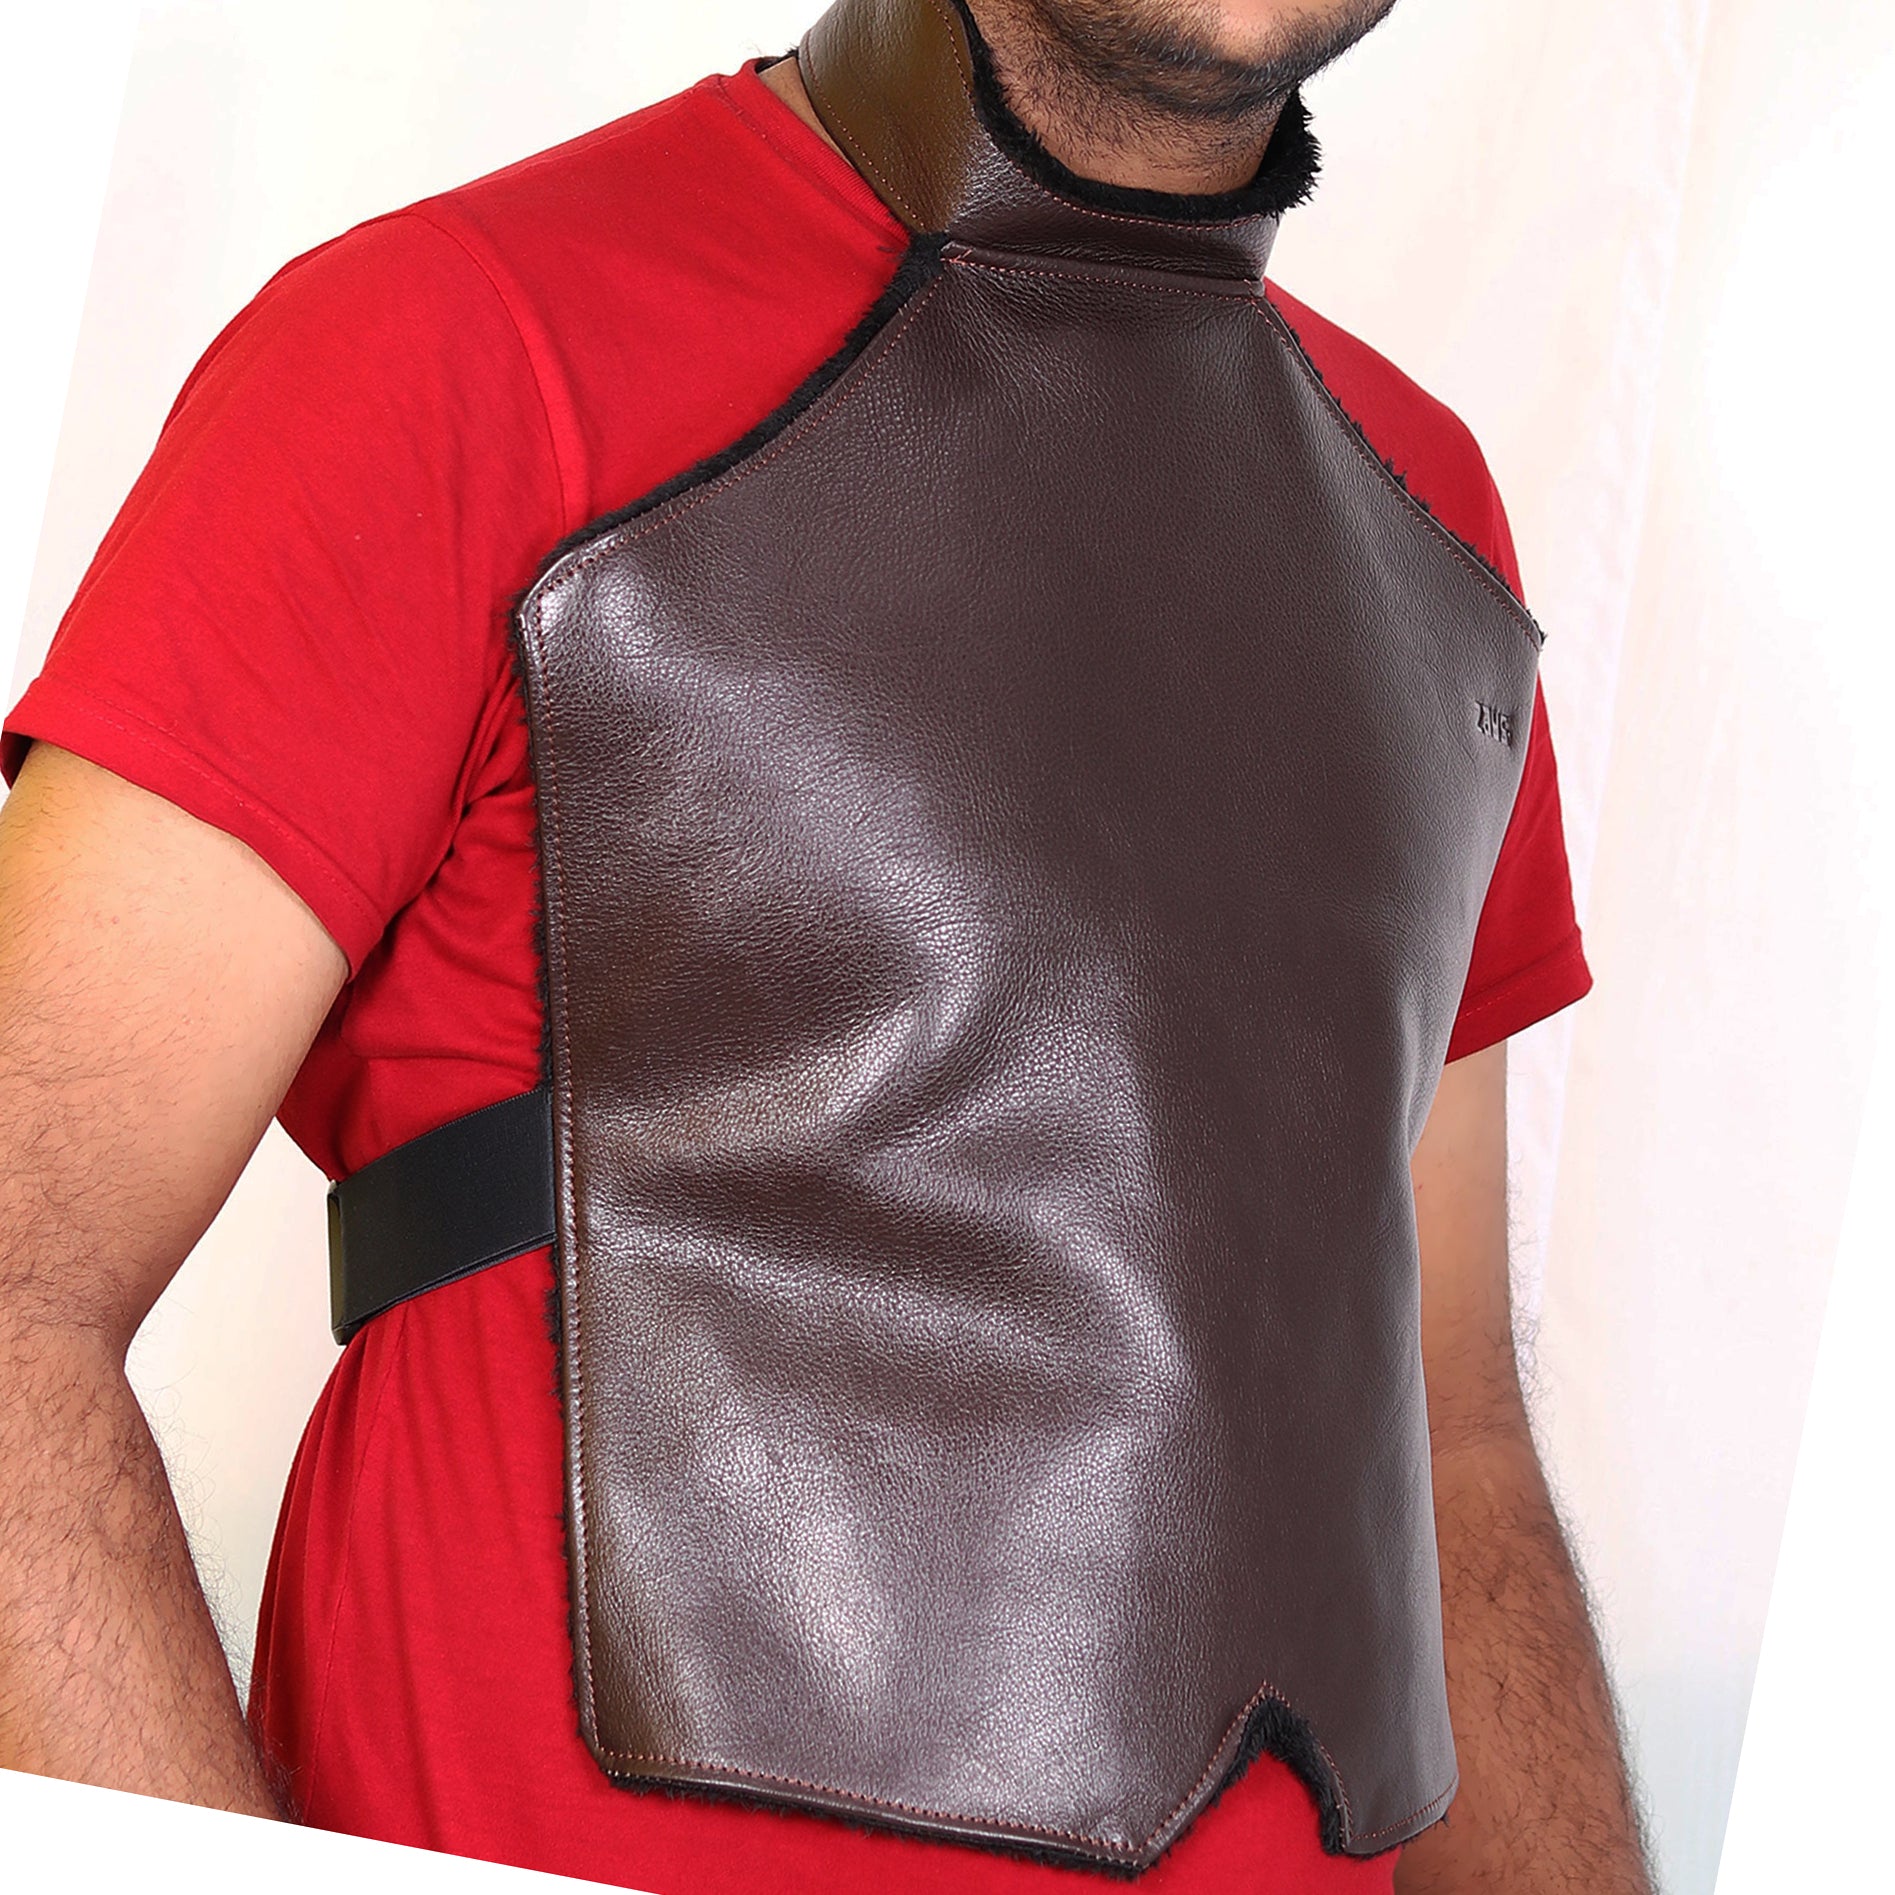 Zays Premium Leather Chest Guard Winter Protection For Biker (Chocolate) -  ZAYSCG02 - Chocolate